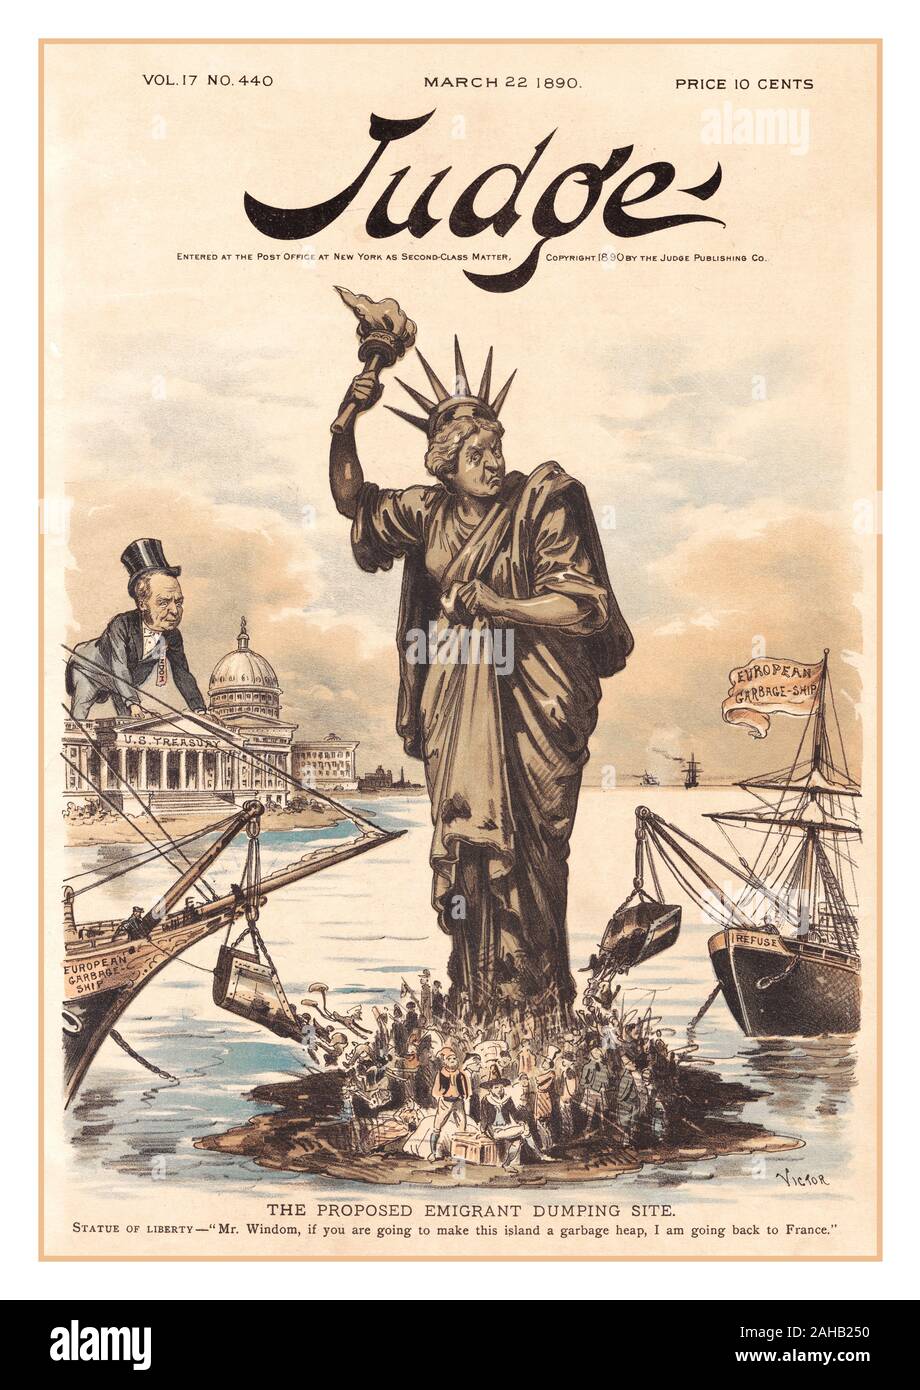 Satirical USA cartoon 1890 attacks a proposal by William Windom, Secretary of the Treasury in the Harrison administration, to move the processing of immigrants from The Battery to Liberty Island. Two 'European Garbage Ships,' one labeled 'Refuse,' unceremoniously deposit a scruffy mix of immigrants at the feet of the Statue of Liberty. Windom looks on from the Treasury building in Washington as Lady Liberty, her face angry, lifts her robes to keep them from being soiled. 'Mr. Windom,' she says, 'if you are going to make this island a garbage heap, I'm going back to France.' Stock Photo